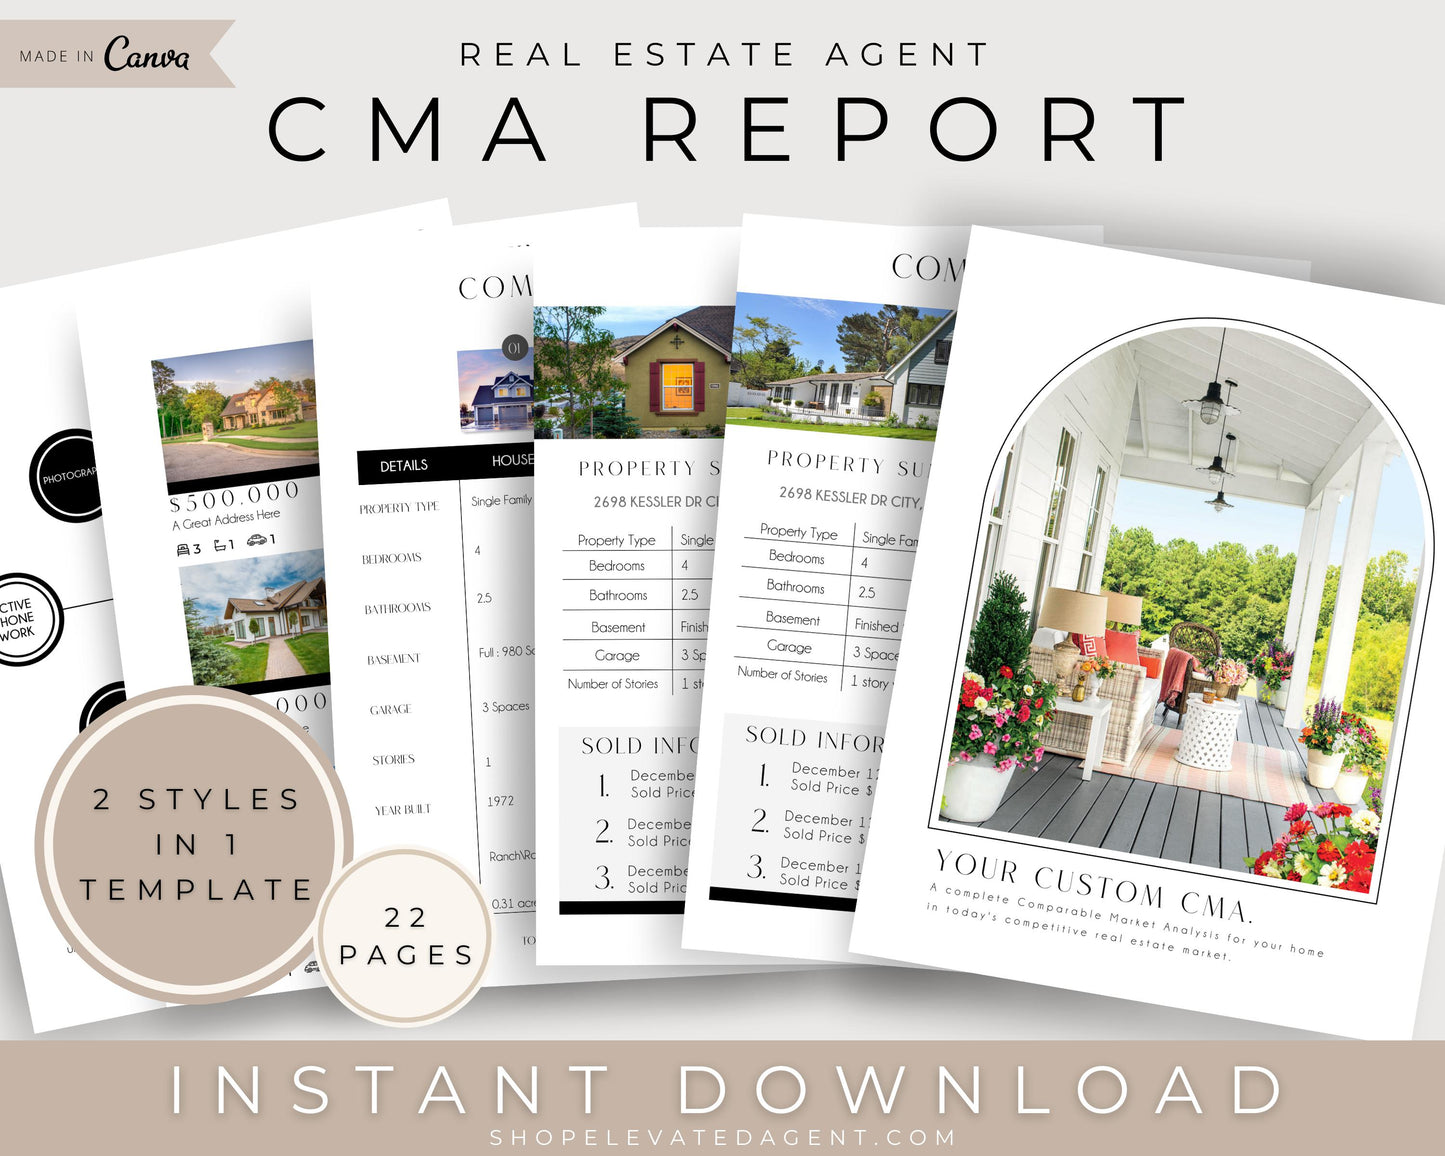 Comparable Market Analysis Report - Real Estate Agent, Realtor Marketing - Instant Download with 22 pages, 2 styles in 1 Template Made in Canva